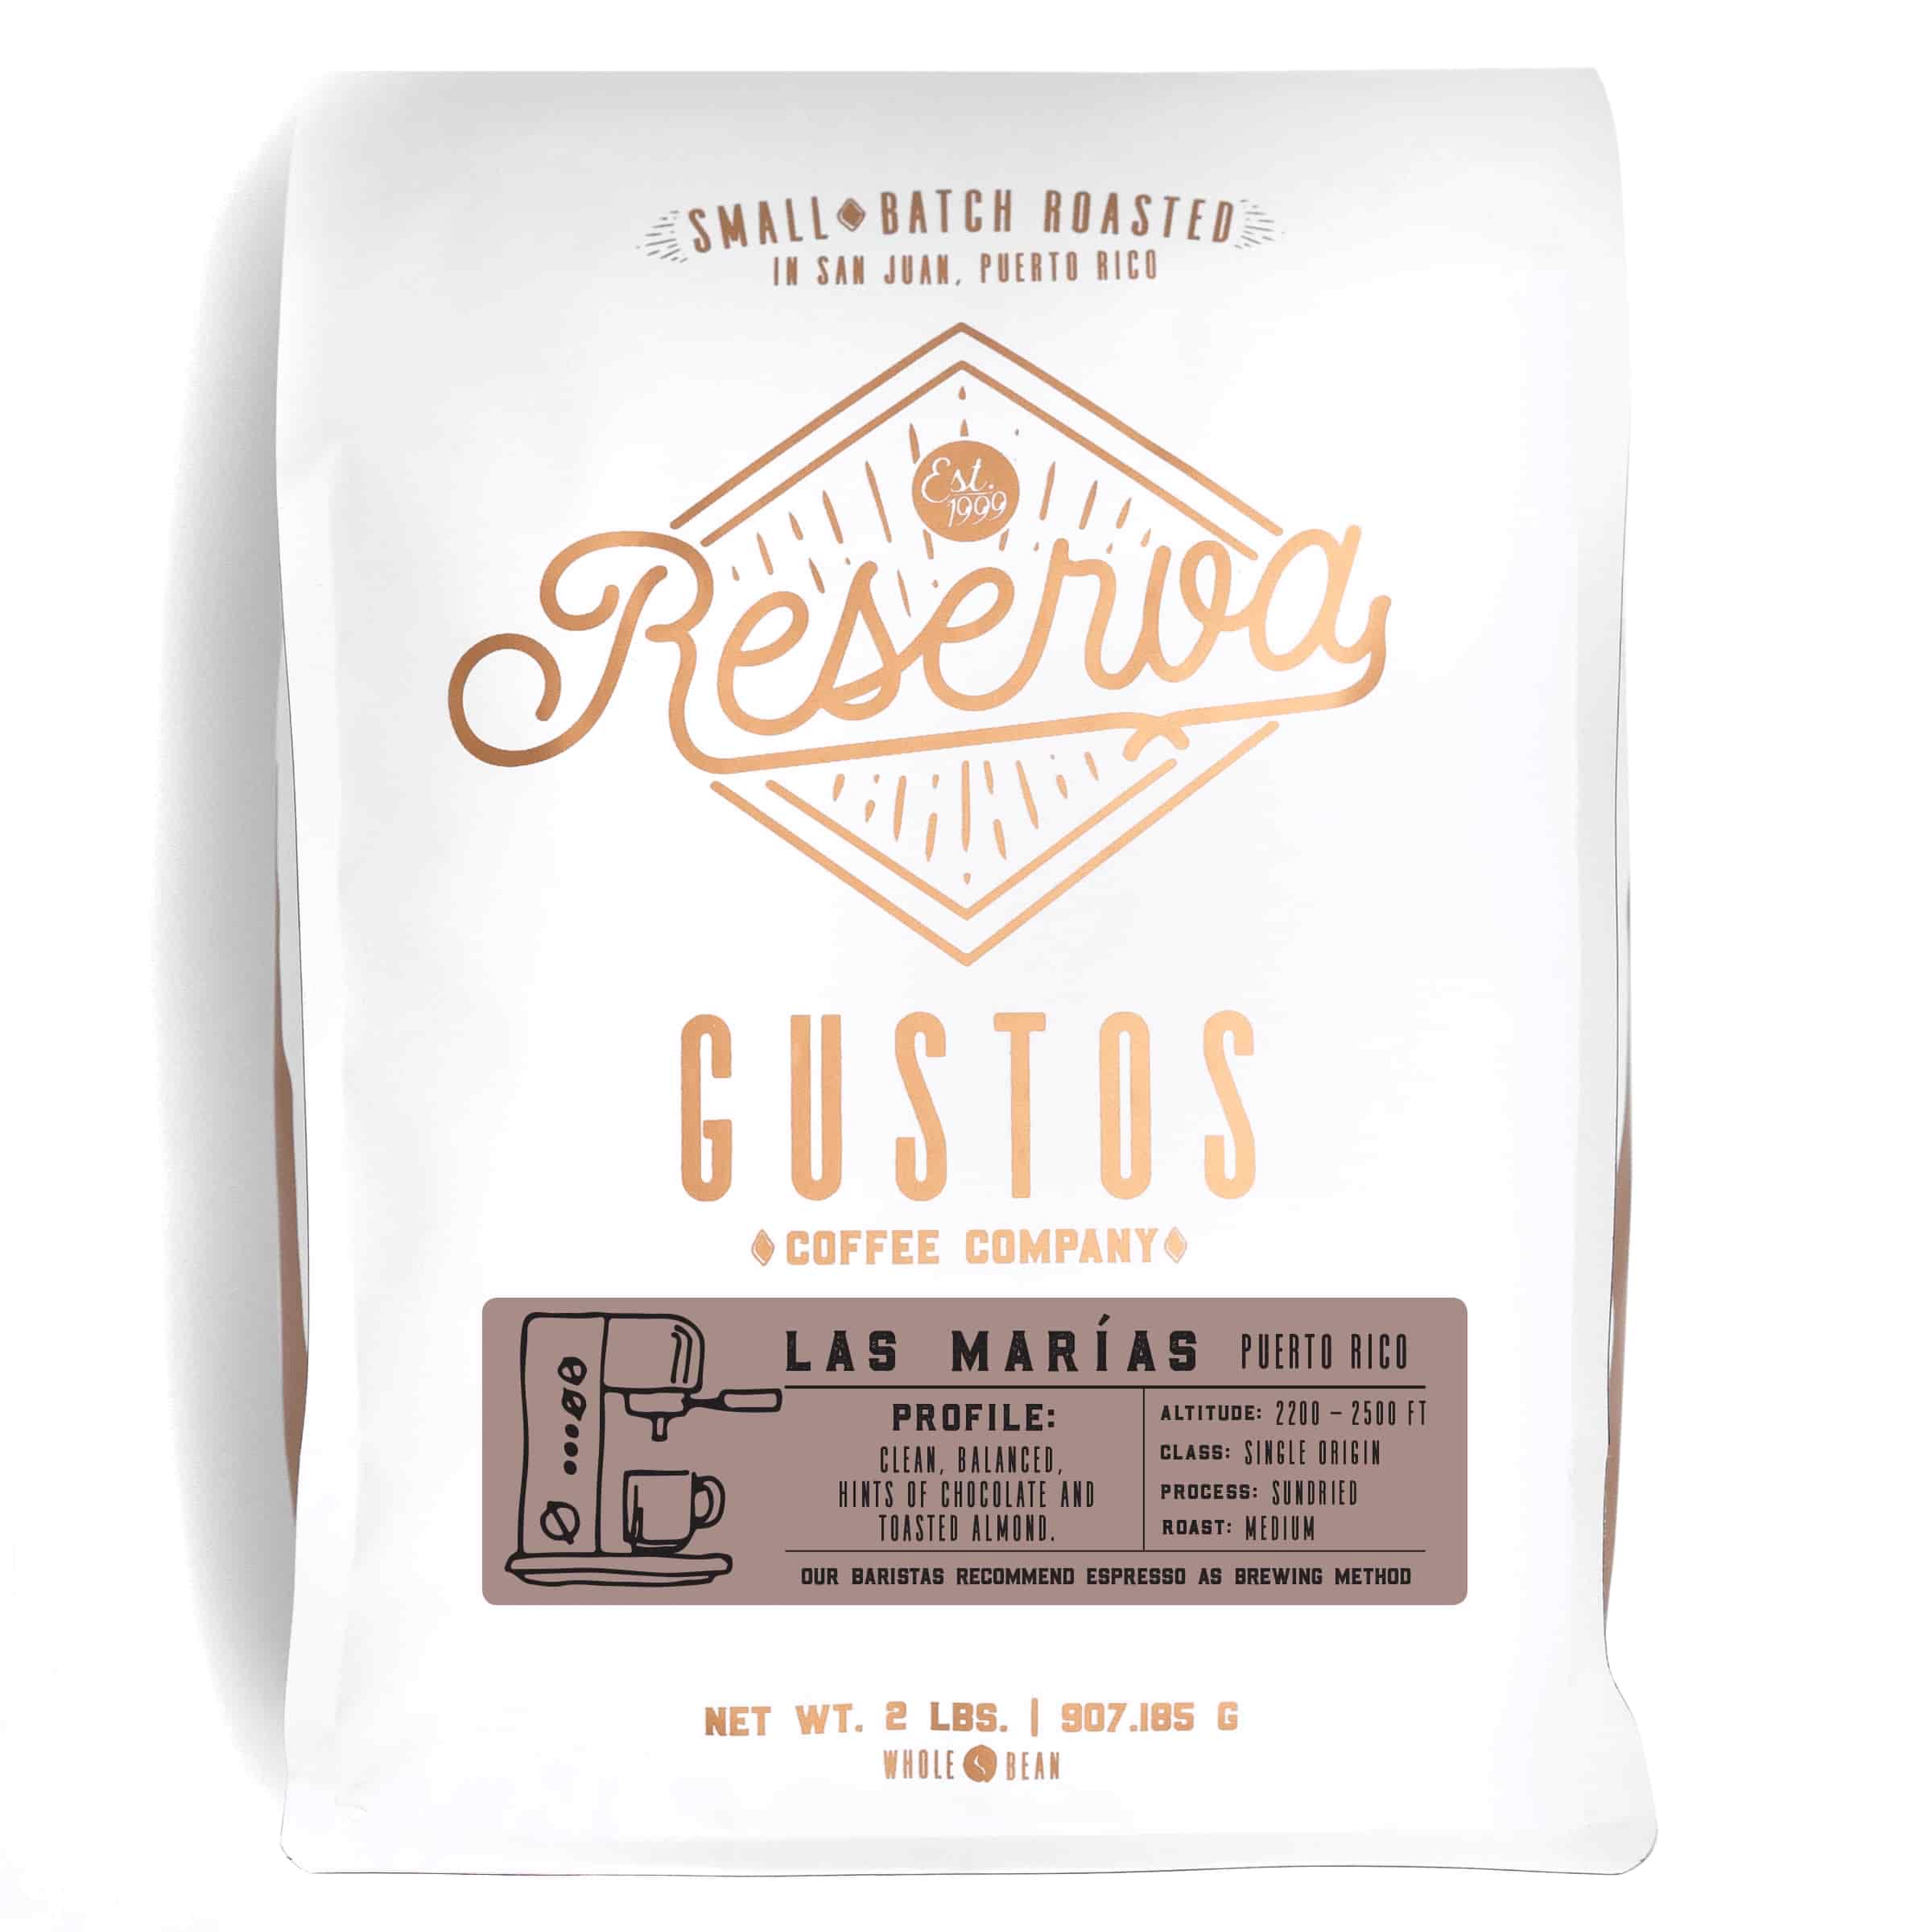 A 2lb bag of Specialty Coffee from Las Marias PR by Gustos Coffee Co